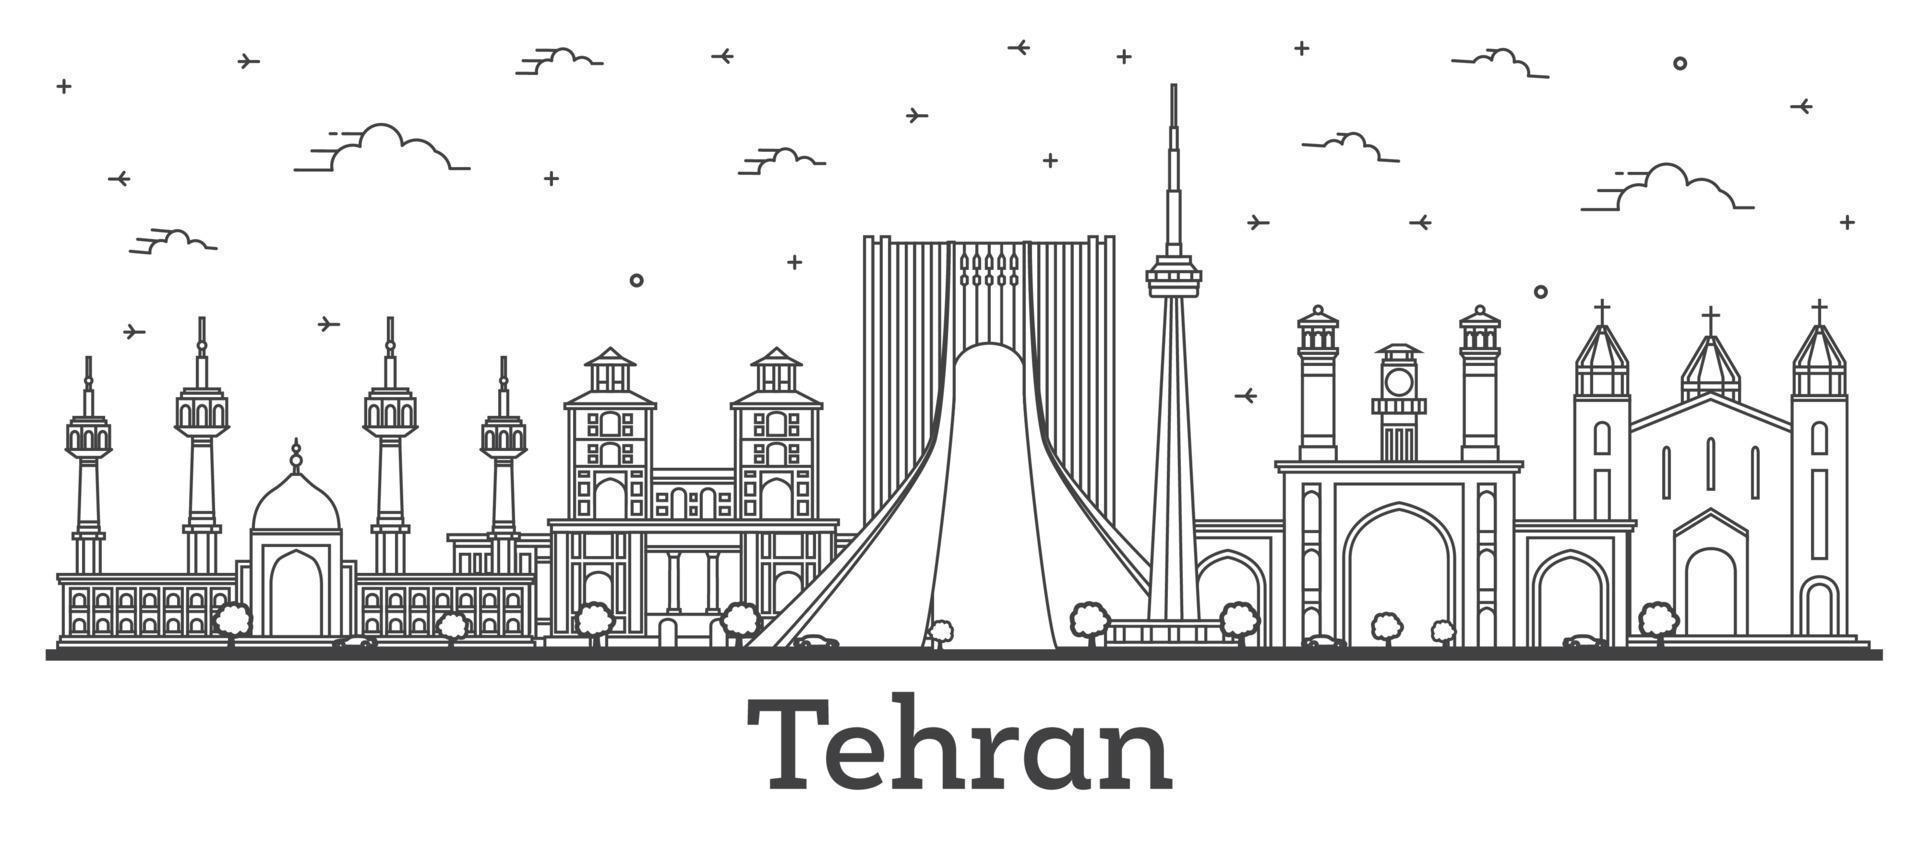 Outline Tehran Iran City Skyline with Modern and Historic Buildings Isolated on White. vector